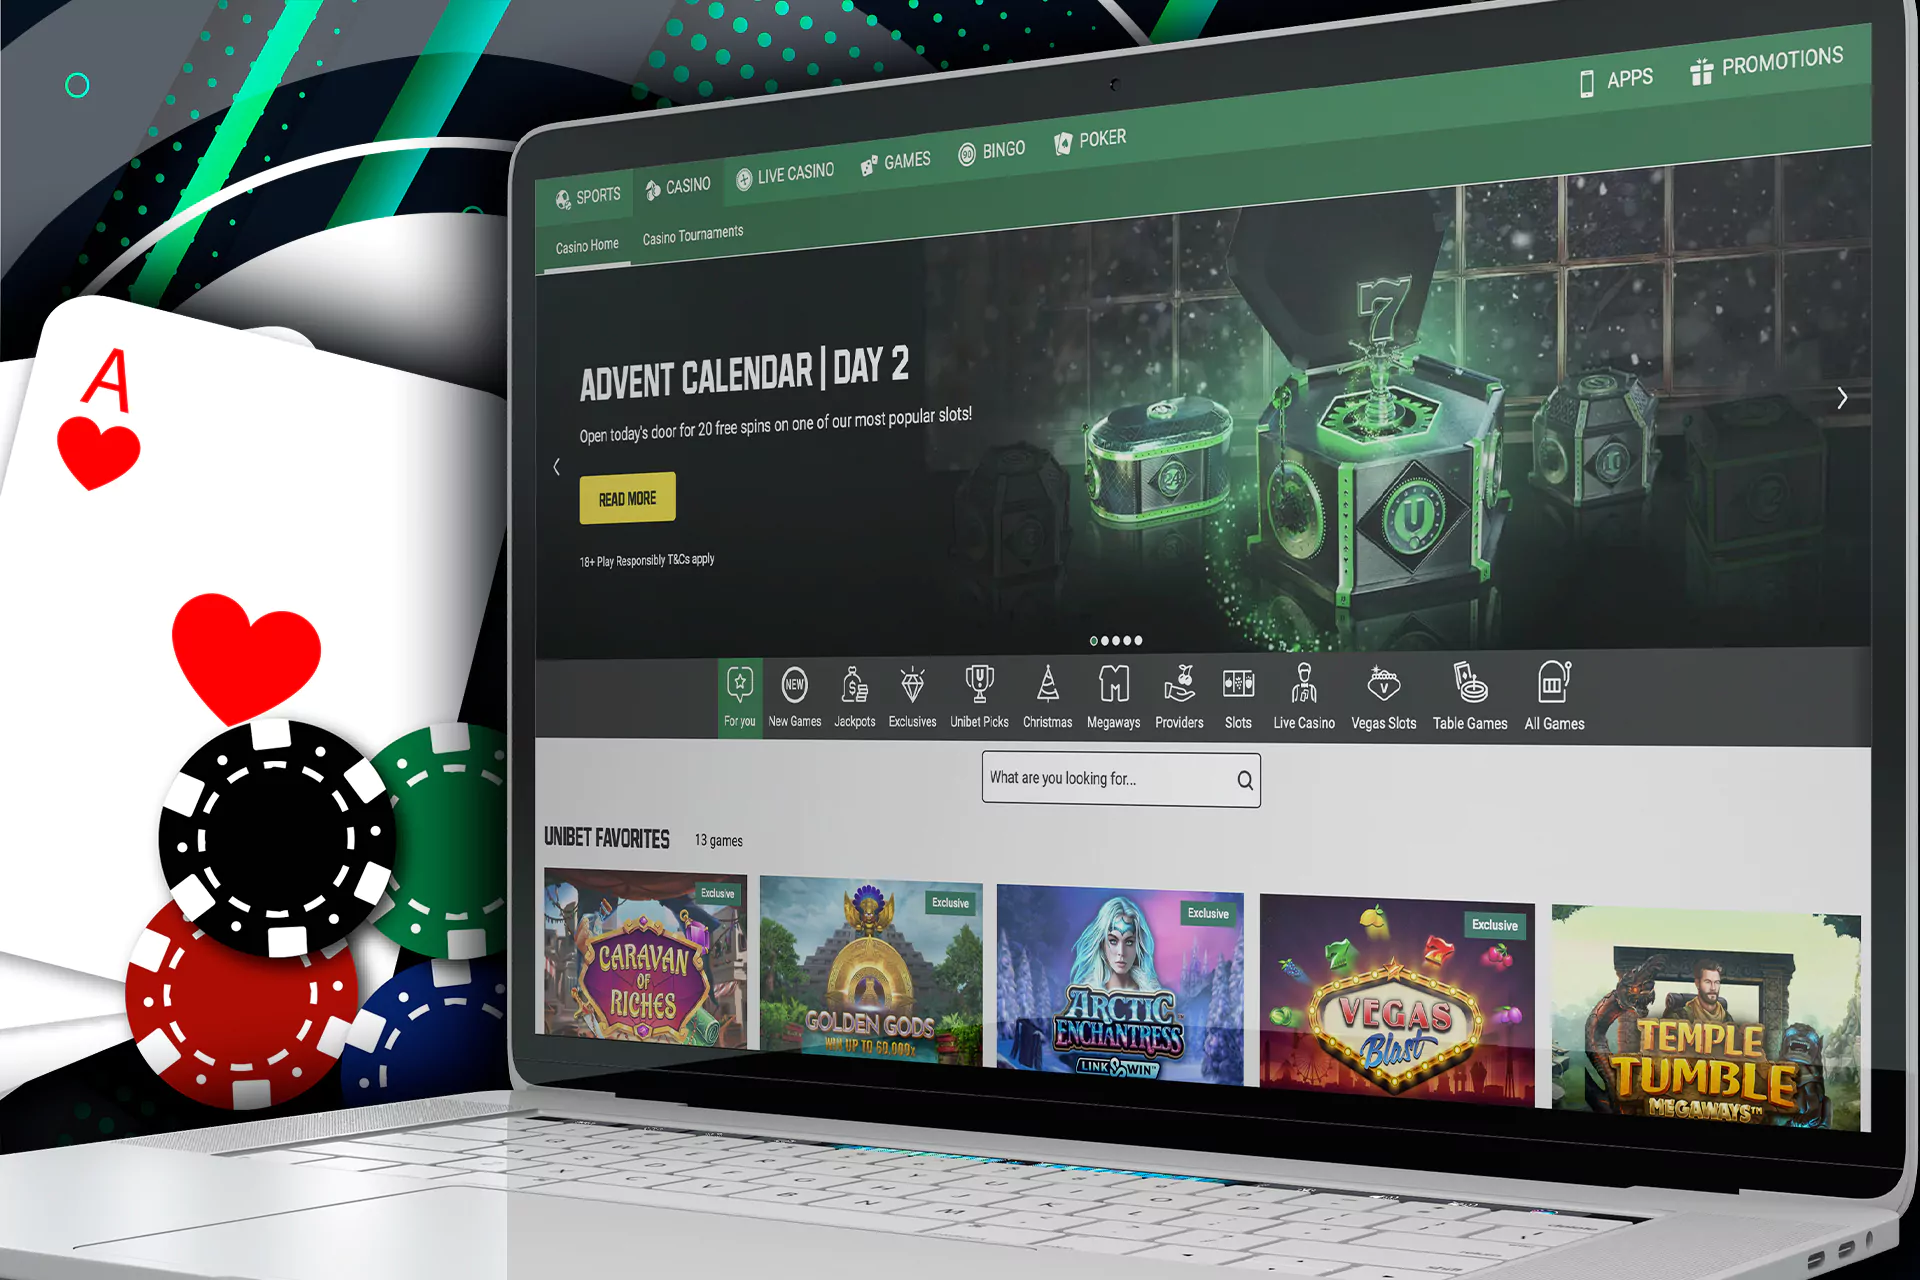 Play slots and other casino games at Unibet.